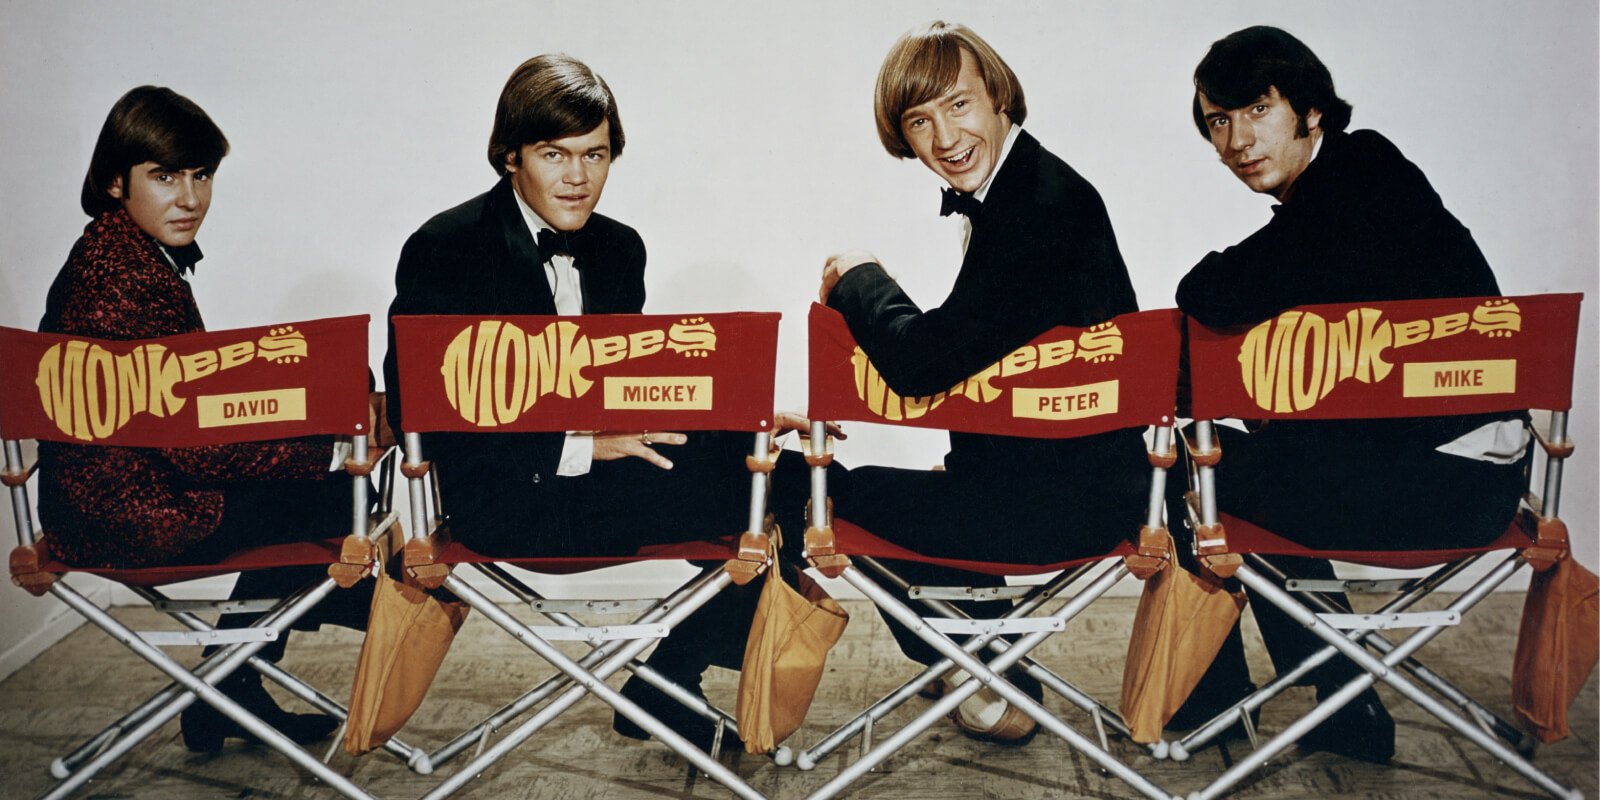 The Monkees had plenty of songs that should have made the top of the charts, but didn't. Davy Jones, Micky Dolenz, Peter Tork, Mike Nesmith